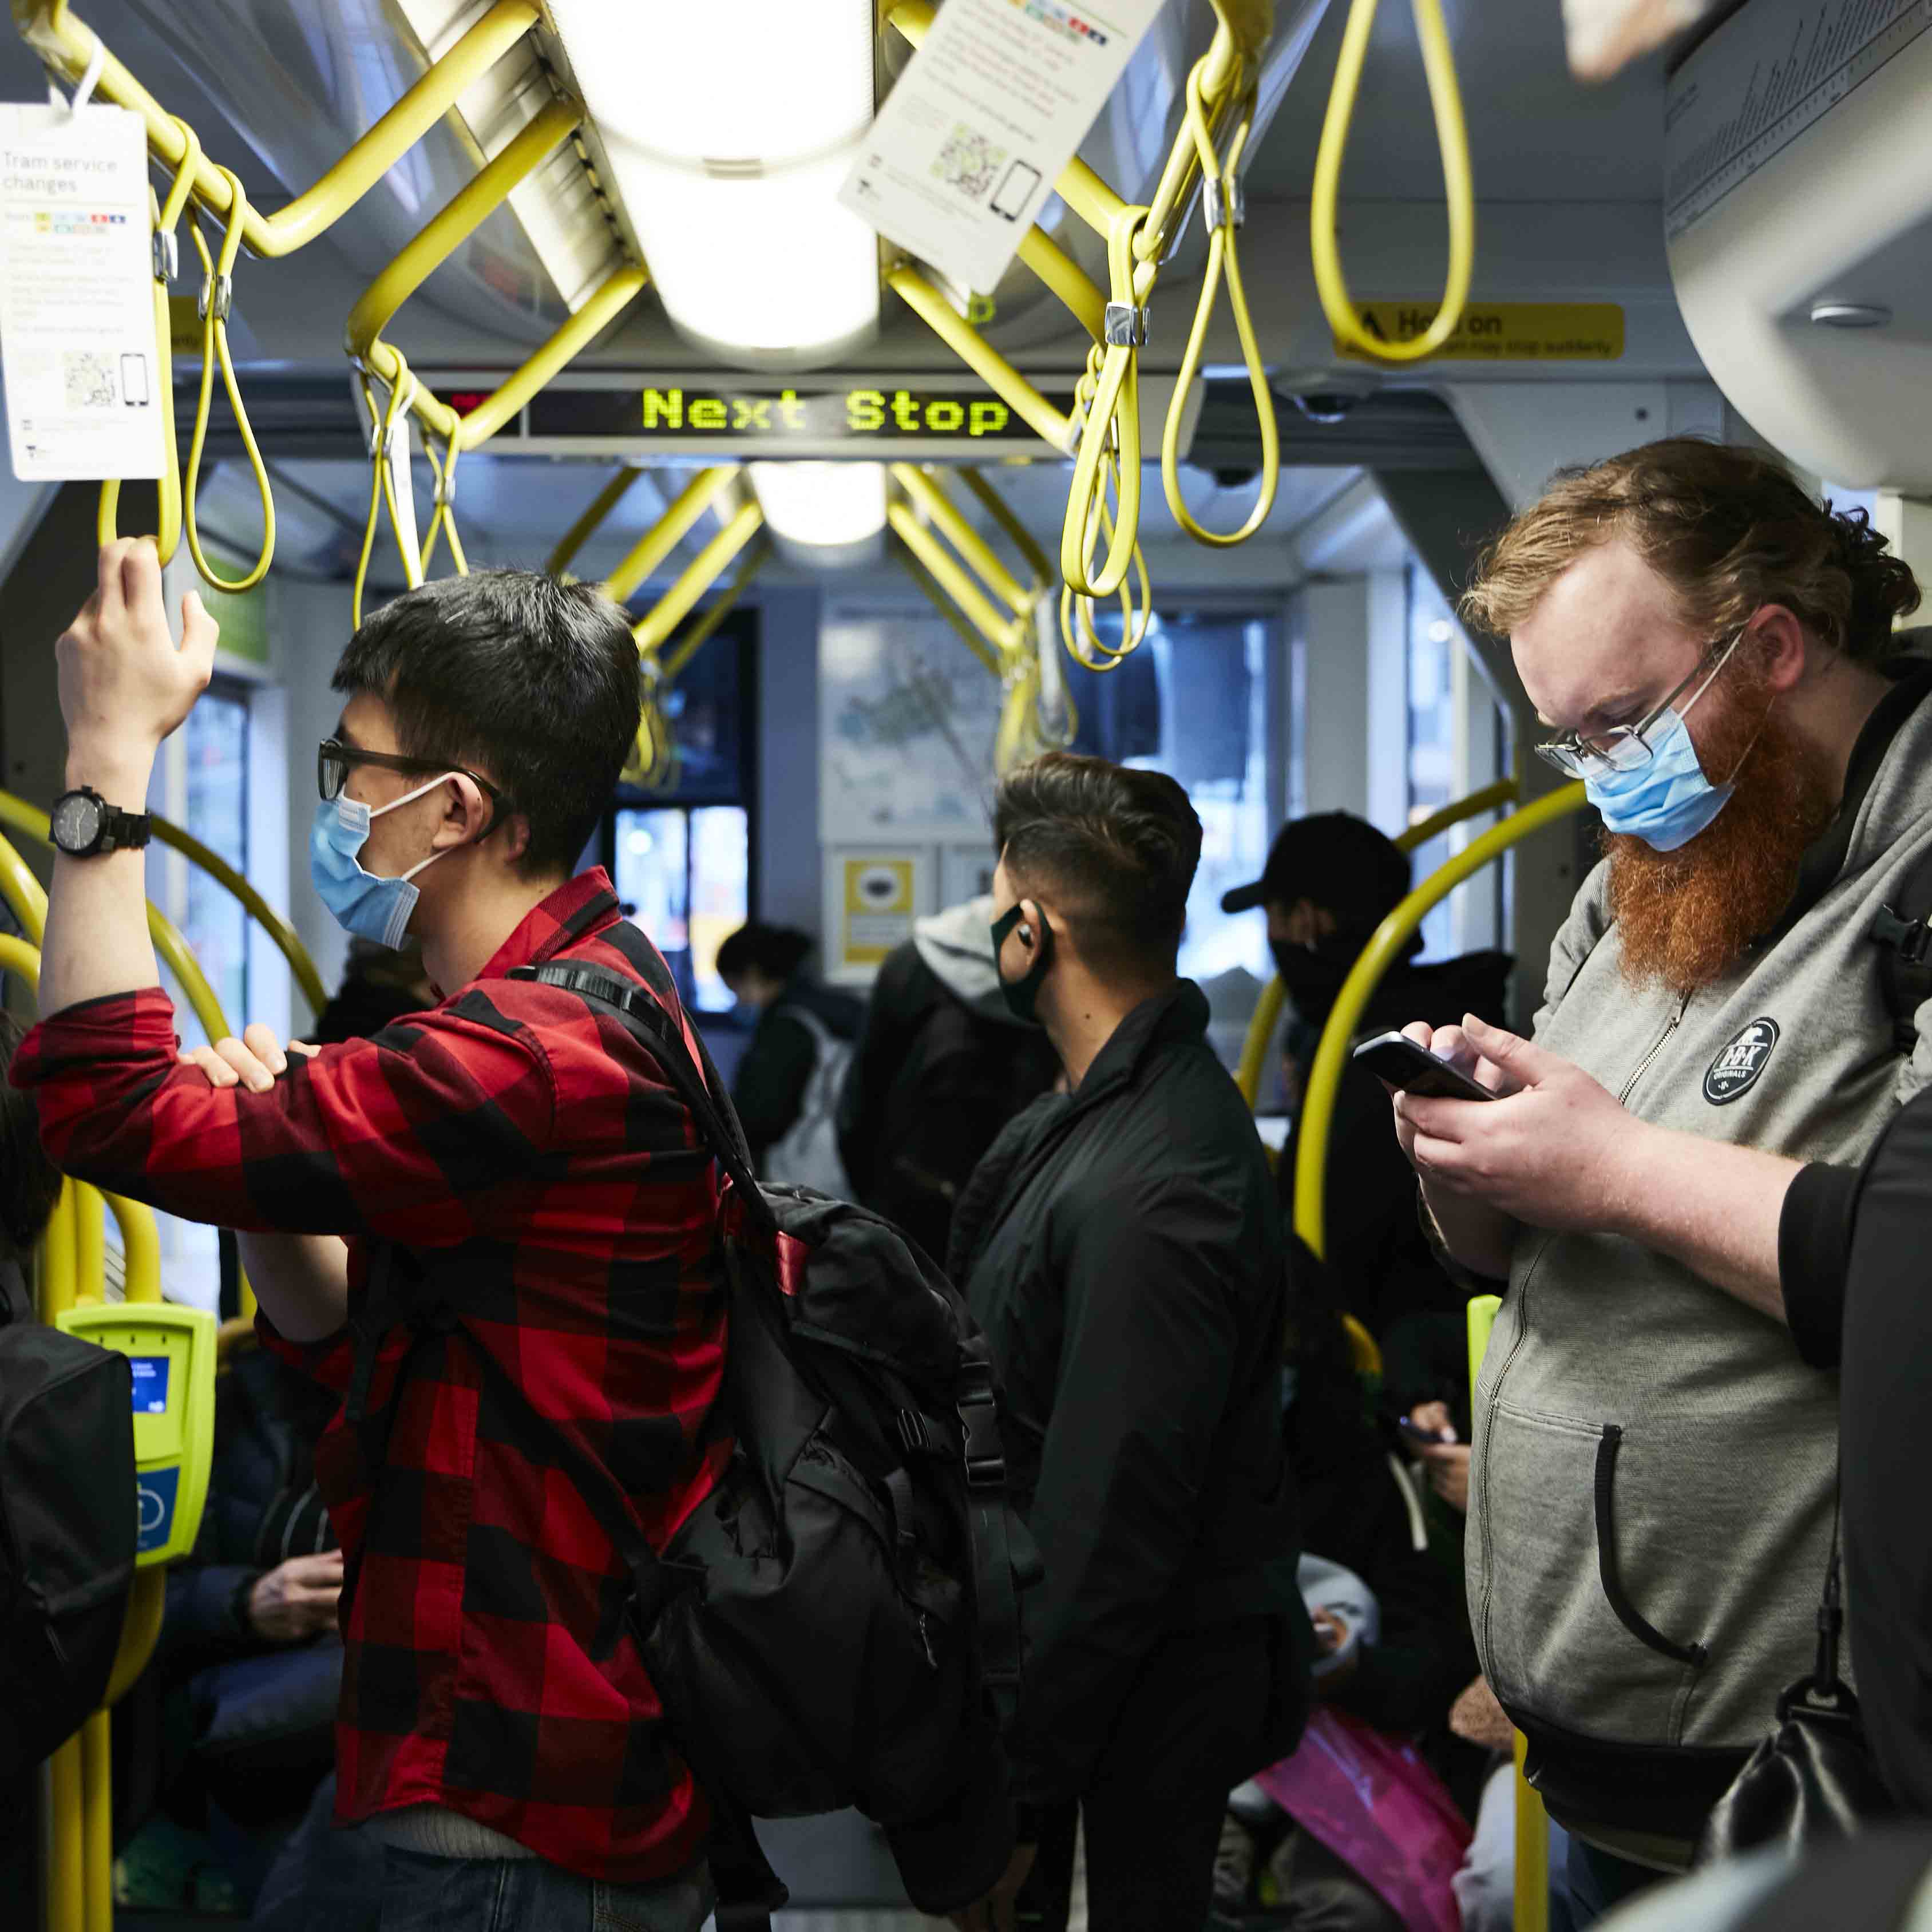 Image is a colour photograph showing passengers travelling on a tram. A person in a red and black checkered shirt stands to the left of the image holding onto a yellow hanging strap. They have short black hair and are wearing dark-framed glasses. A person standing to the right of the image has a red beard and medium-length red hair. They are wearing glasses and a grey hoodie and are looking down at the mobile phone in their hands. Several other people can be seen in the image – their backs to the camera. All of the passengers are wearing facemasks as they travel during the COVID-19 pandemic.